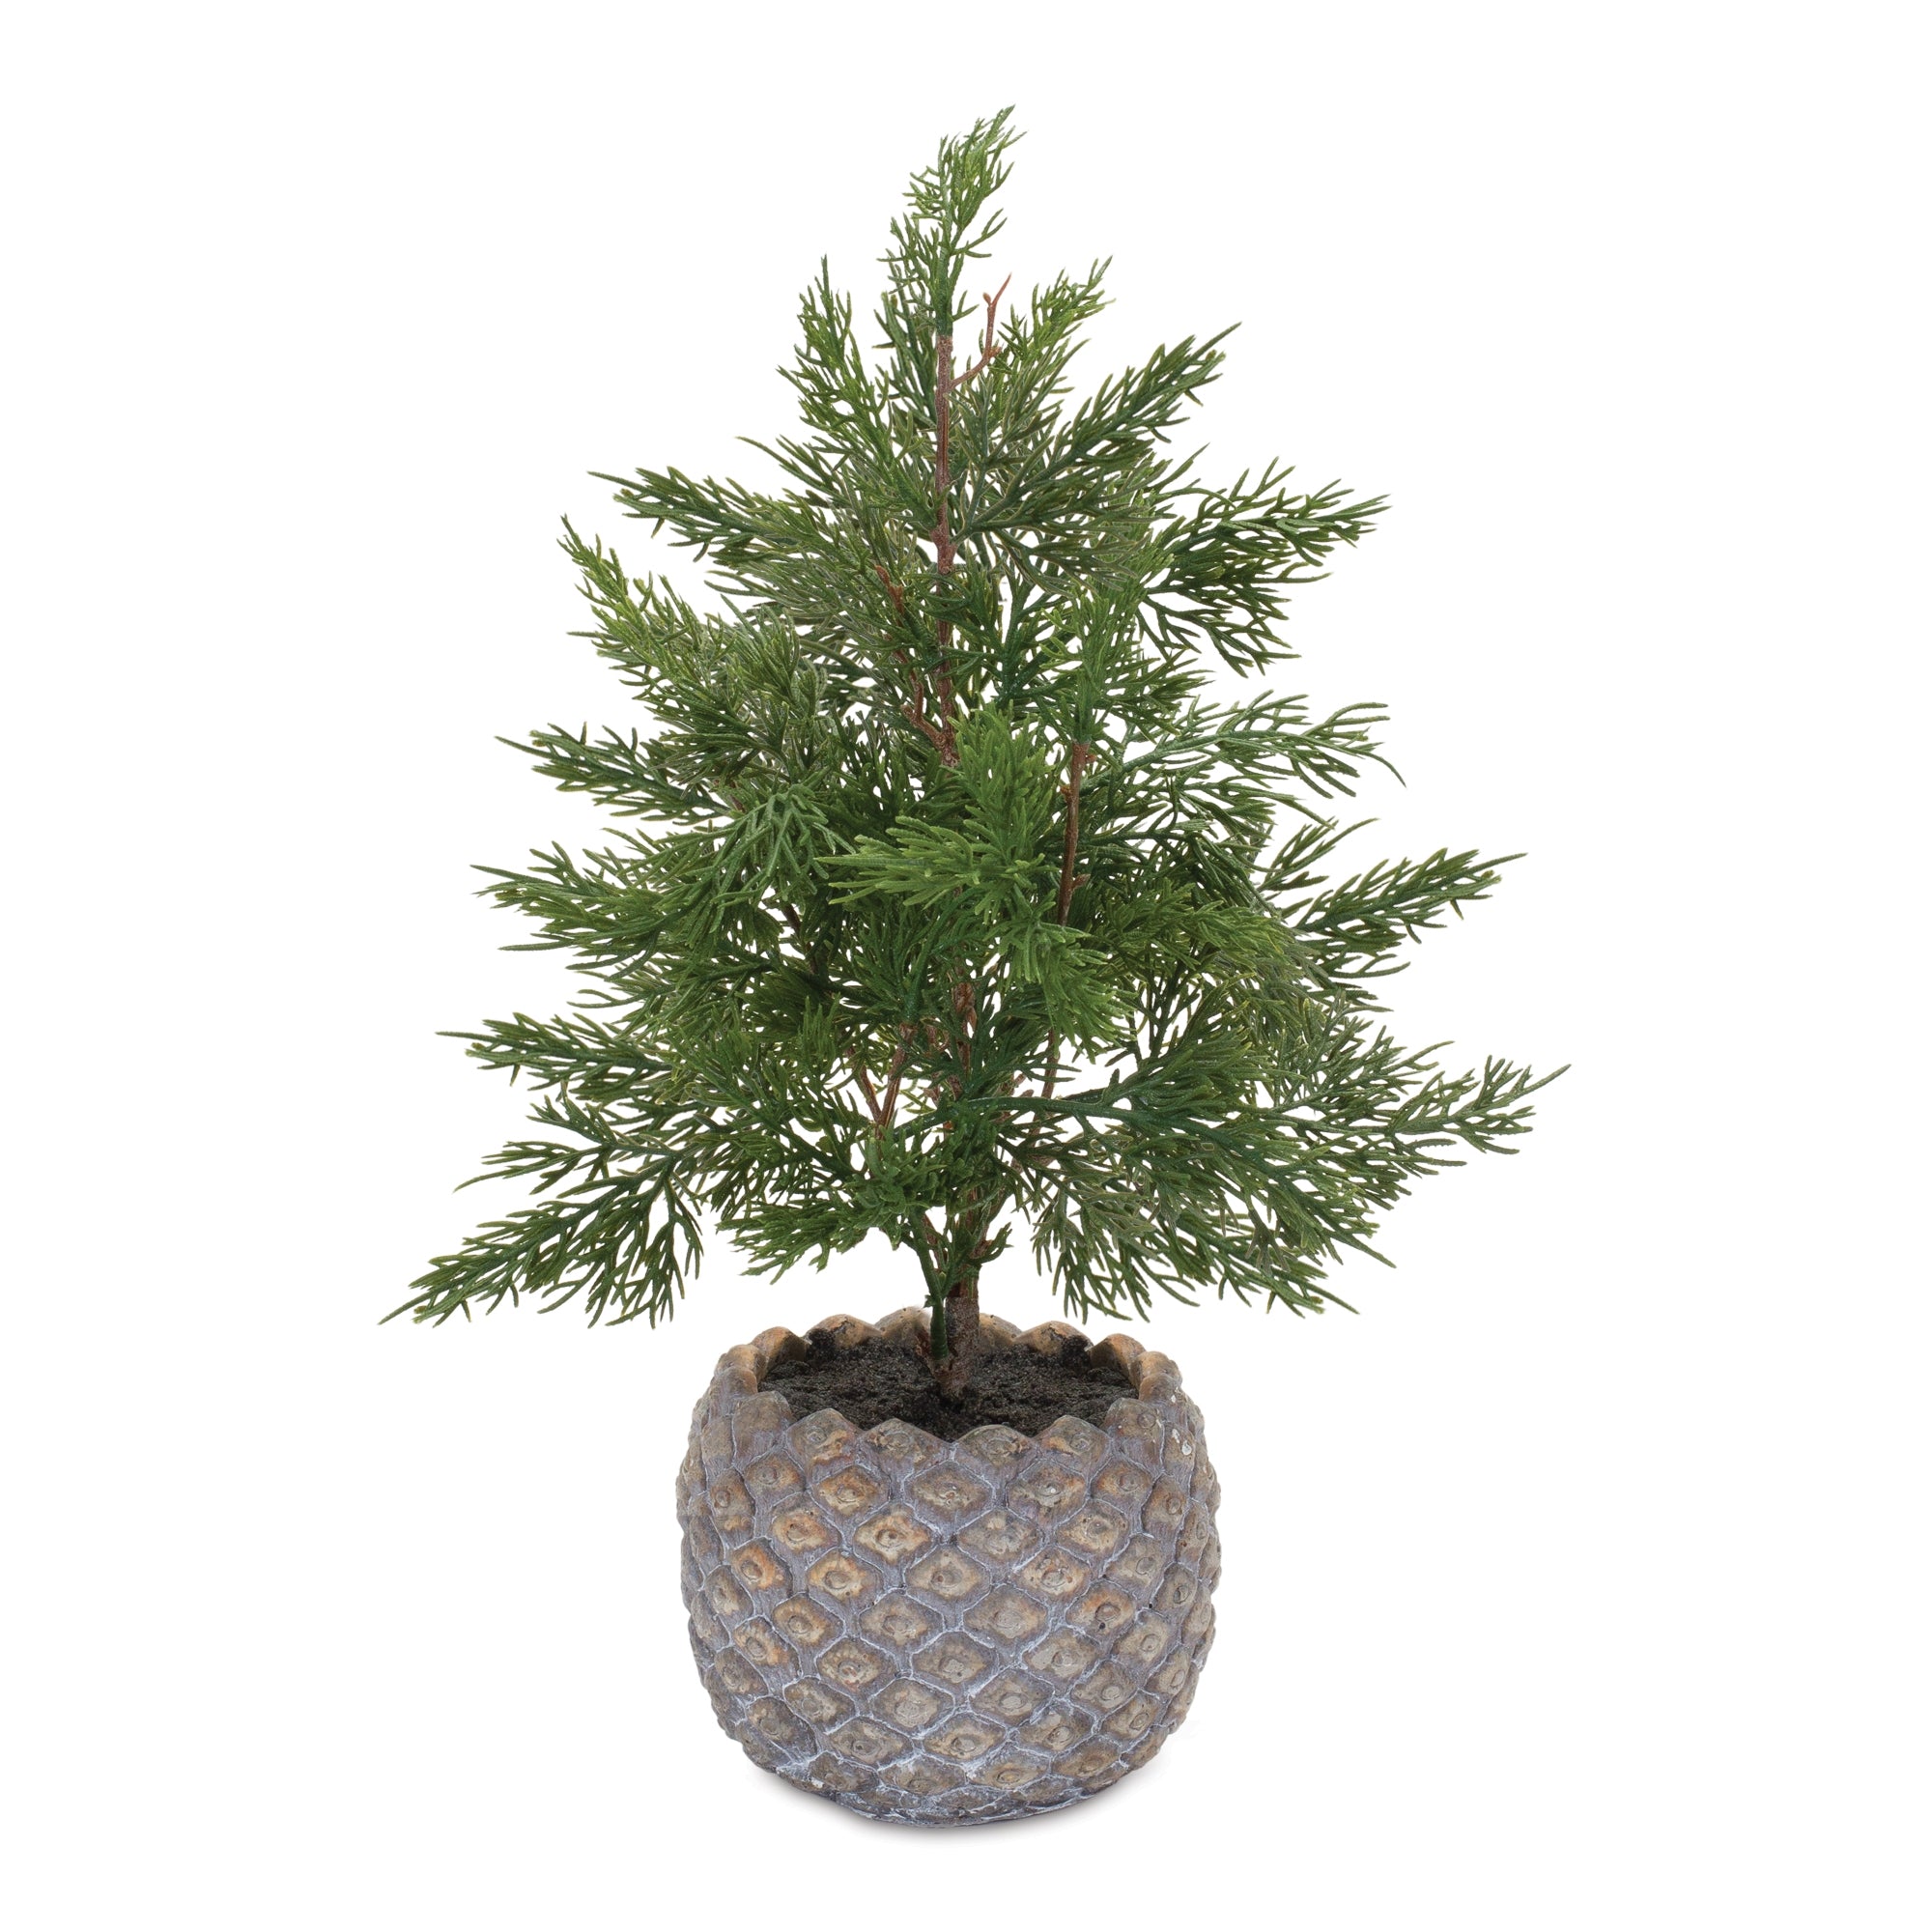 16" Potted Pine w/ Planter